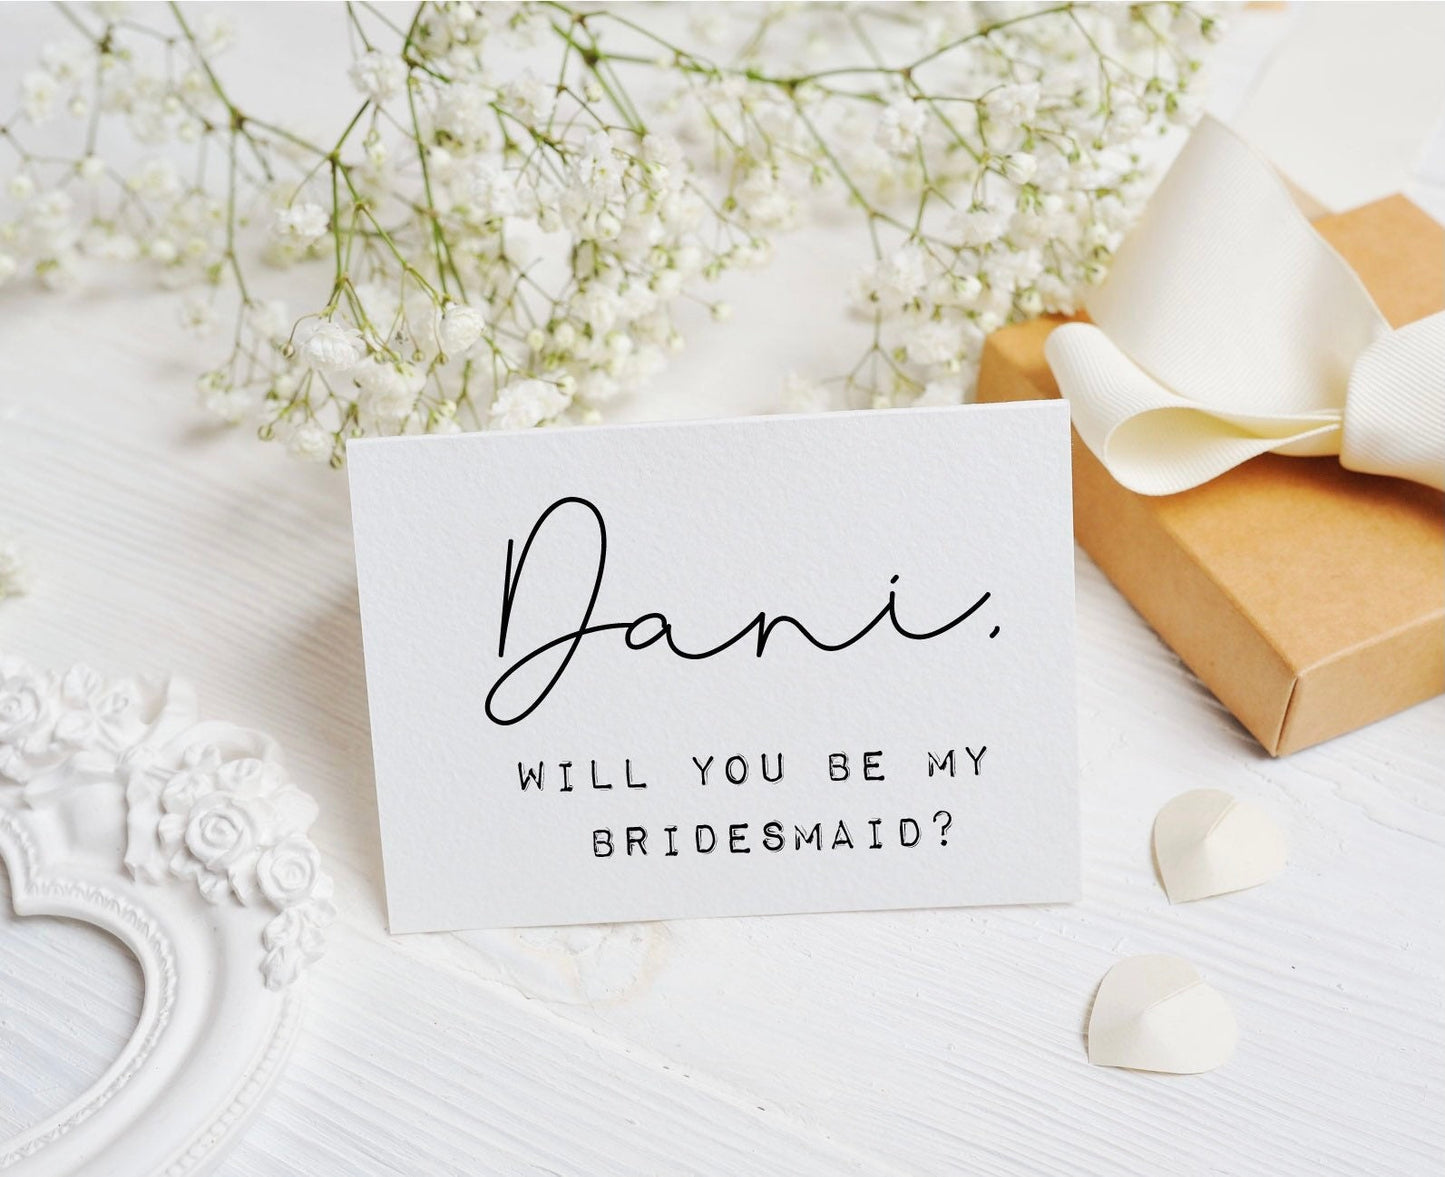 Personalised bridesmaid proposal greeting card, will you be my bridesmaid, bride to be, bridal party, bride tribe cards, best friend wedding